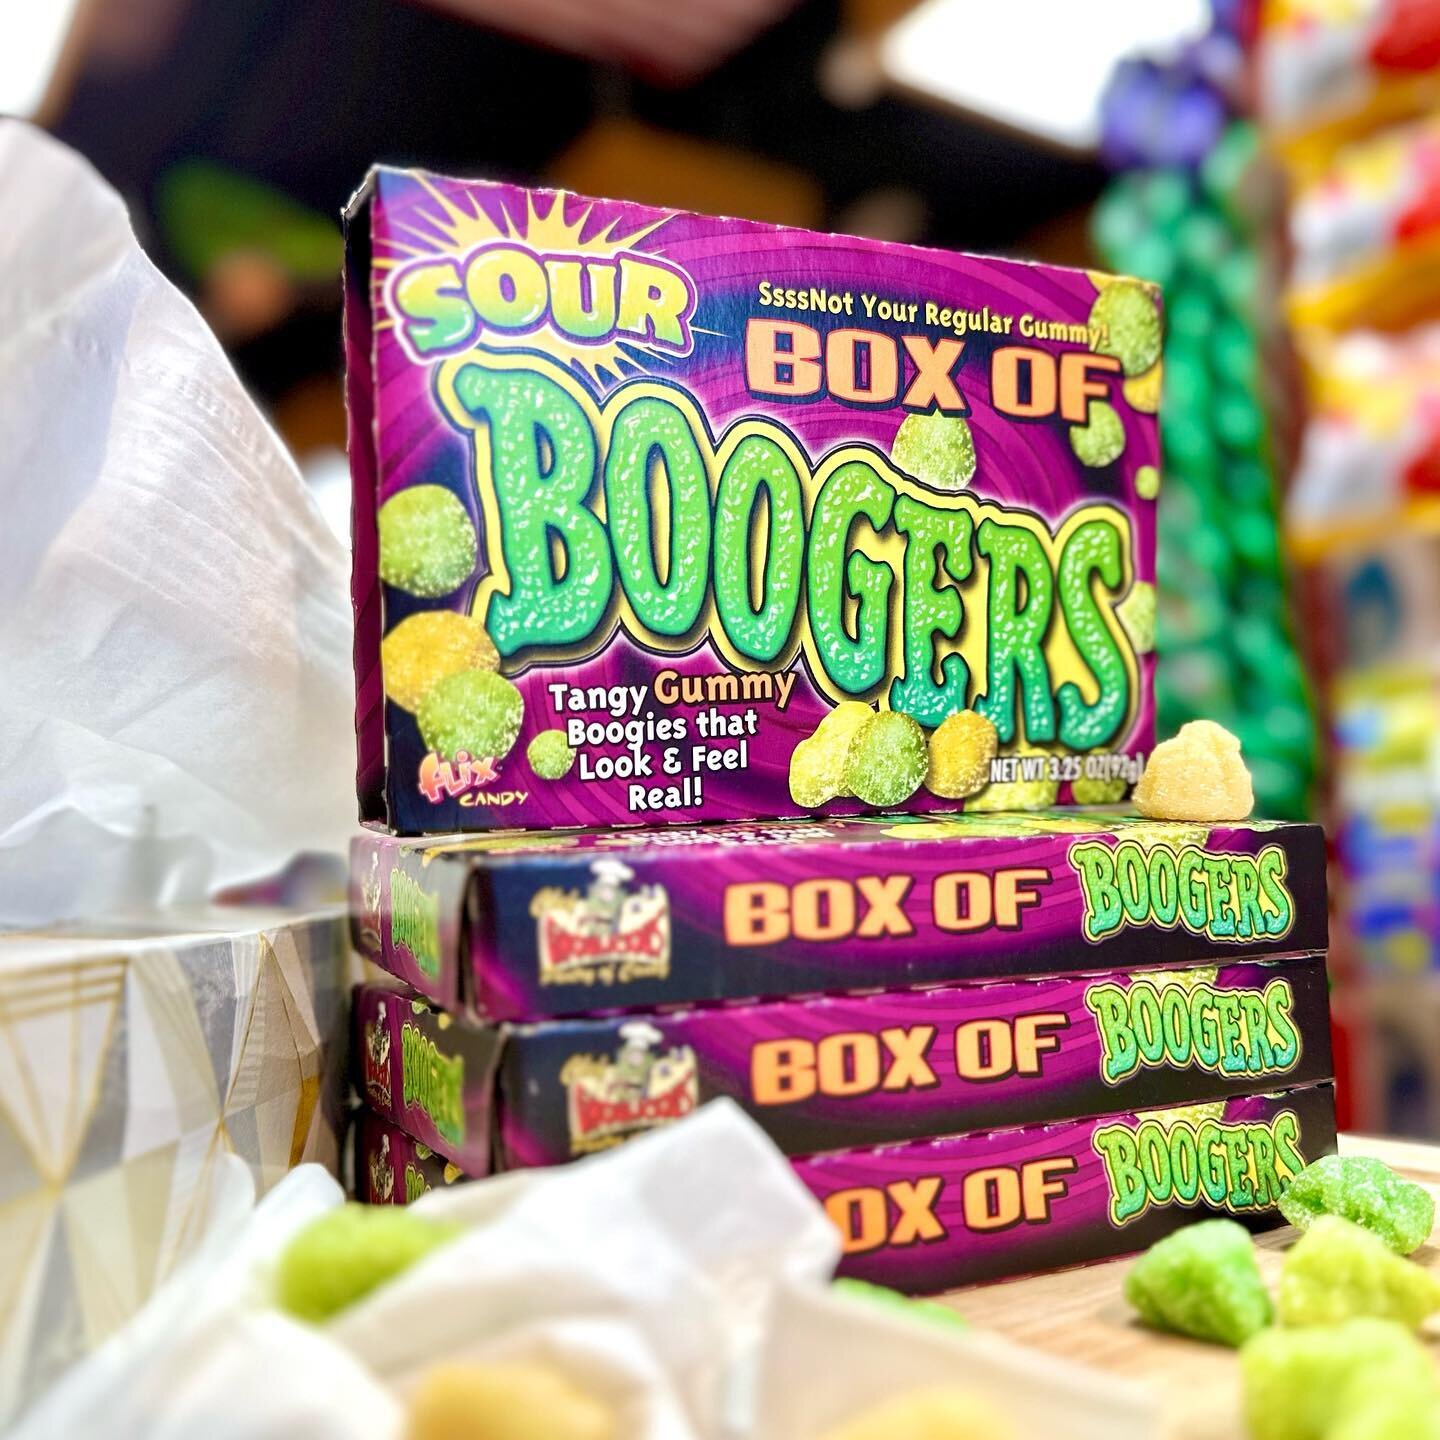 &ldquo;Sssnot your regular gummy&rdquo;😅

Tag a friend and dare them to try this one!

#oldetymecandyshoppe #candy #candyshop #canmore #boogers #boogerscandy #sourcandy #flixcandy